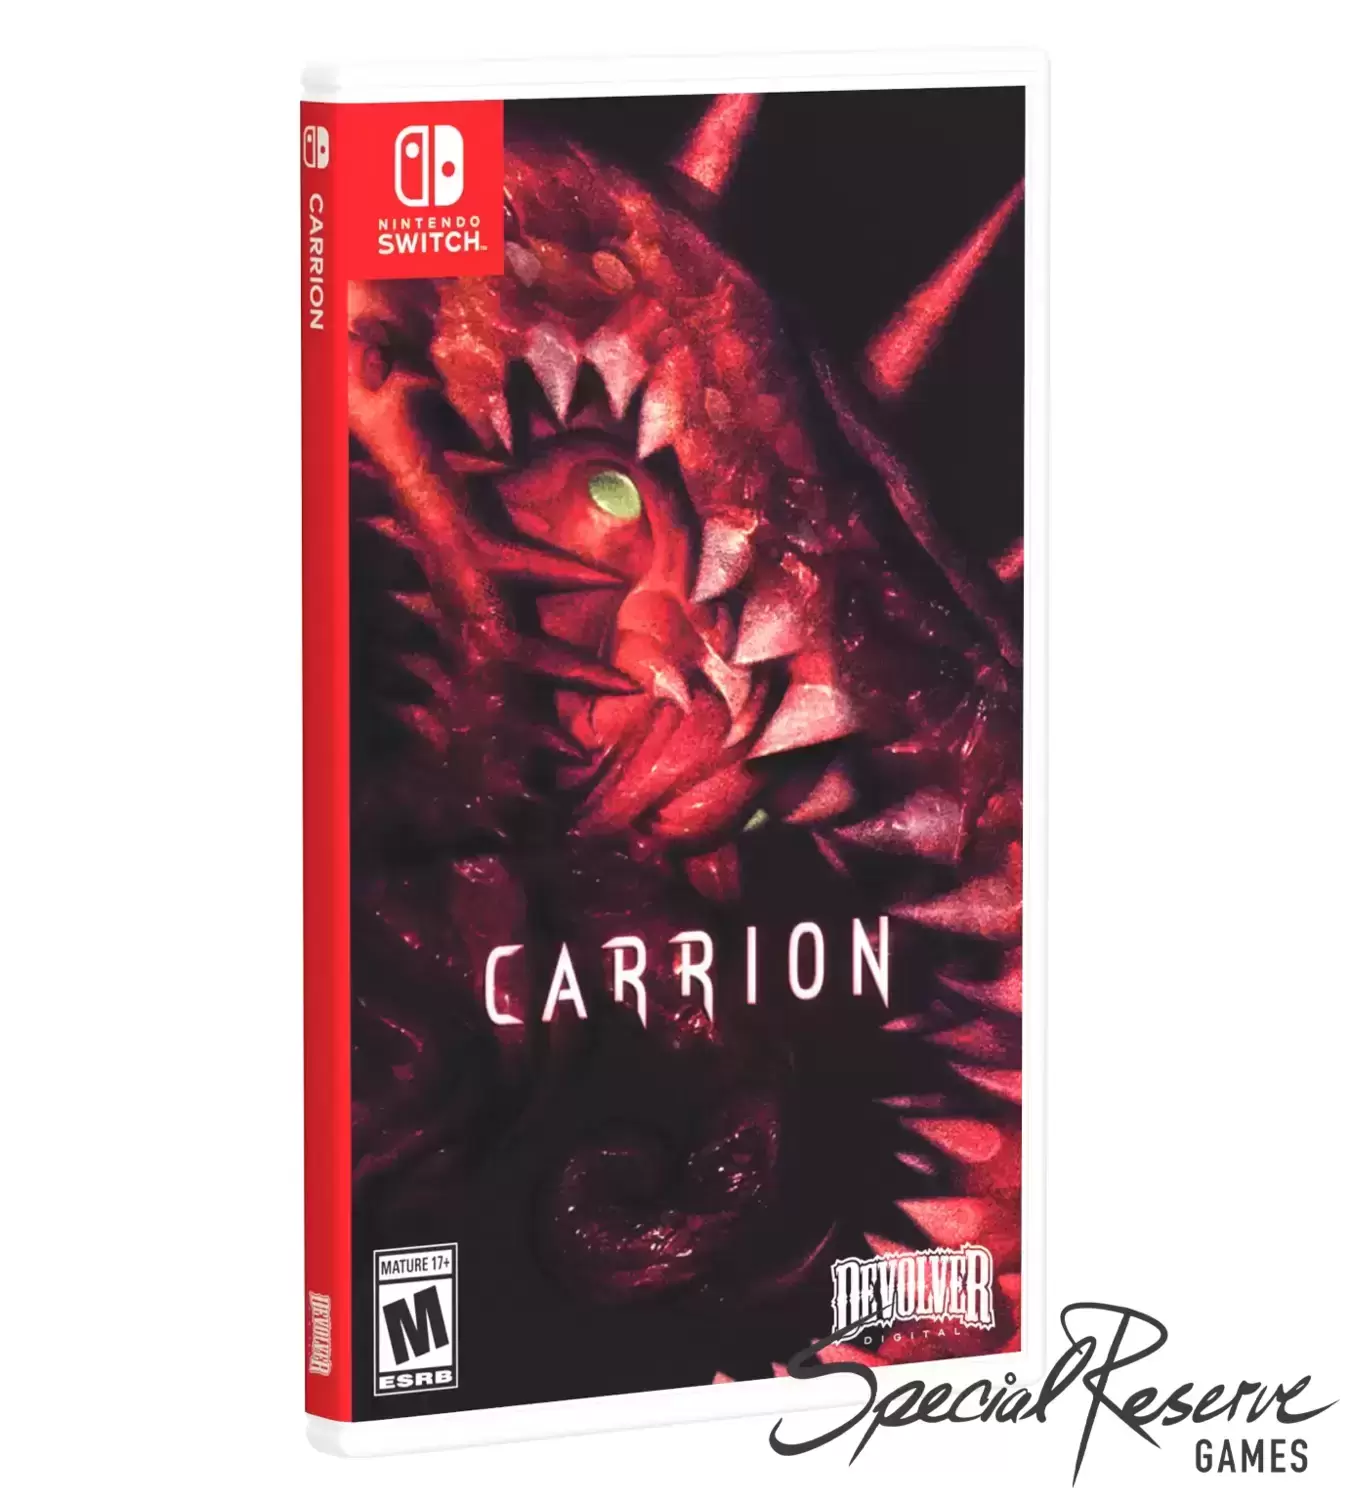 Nintendo Switch Games - Carrion Exclusive Limited Run Games Cover - Special Reserve Games